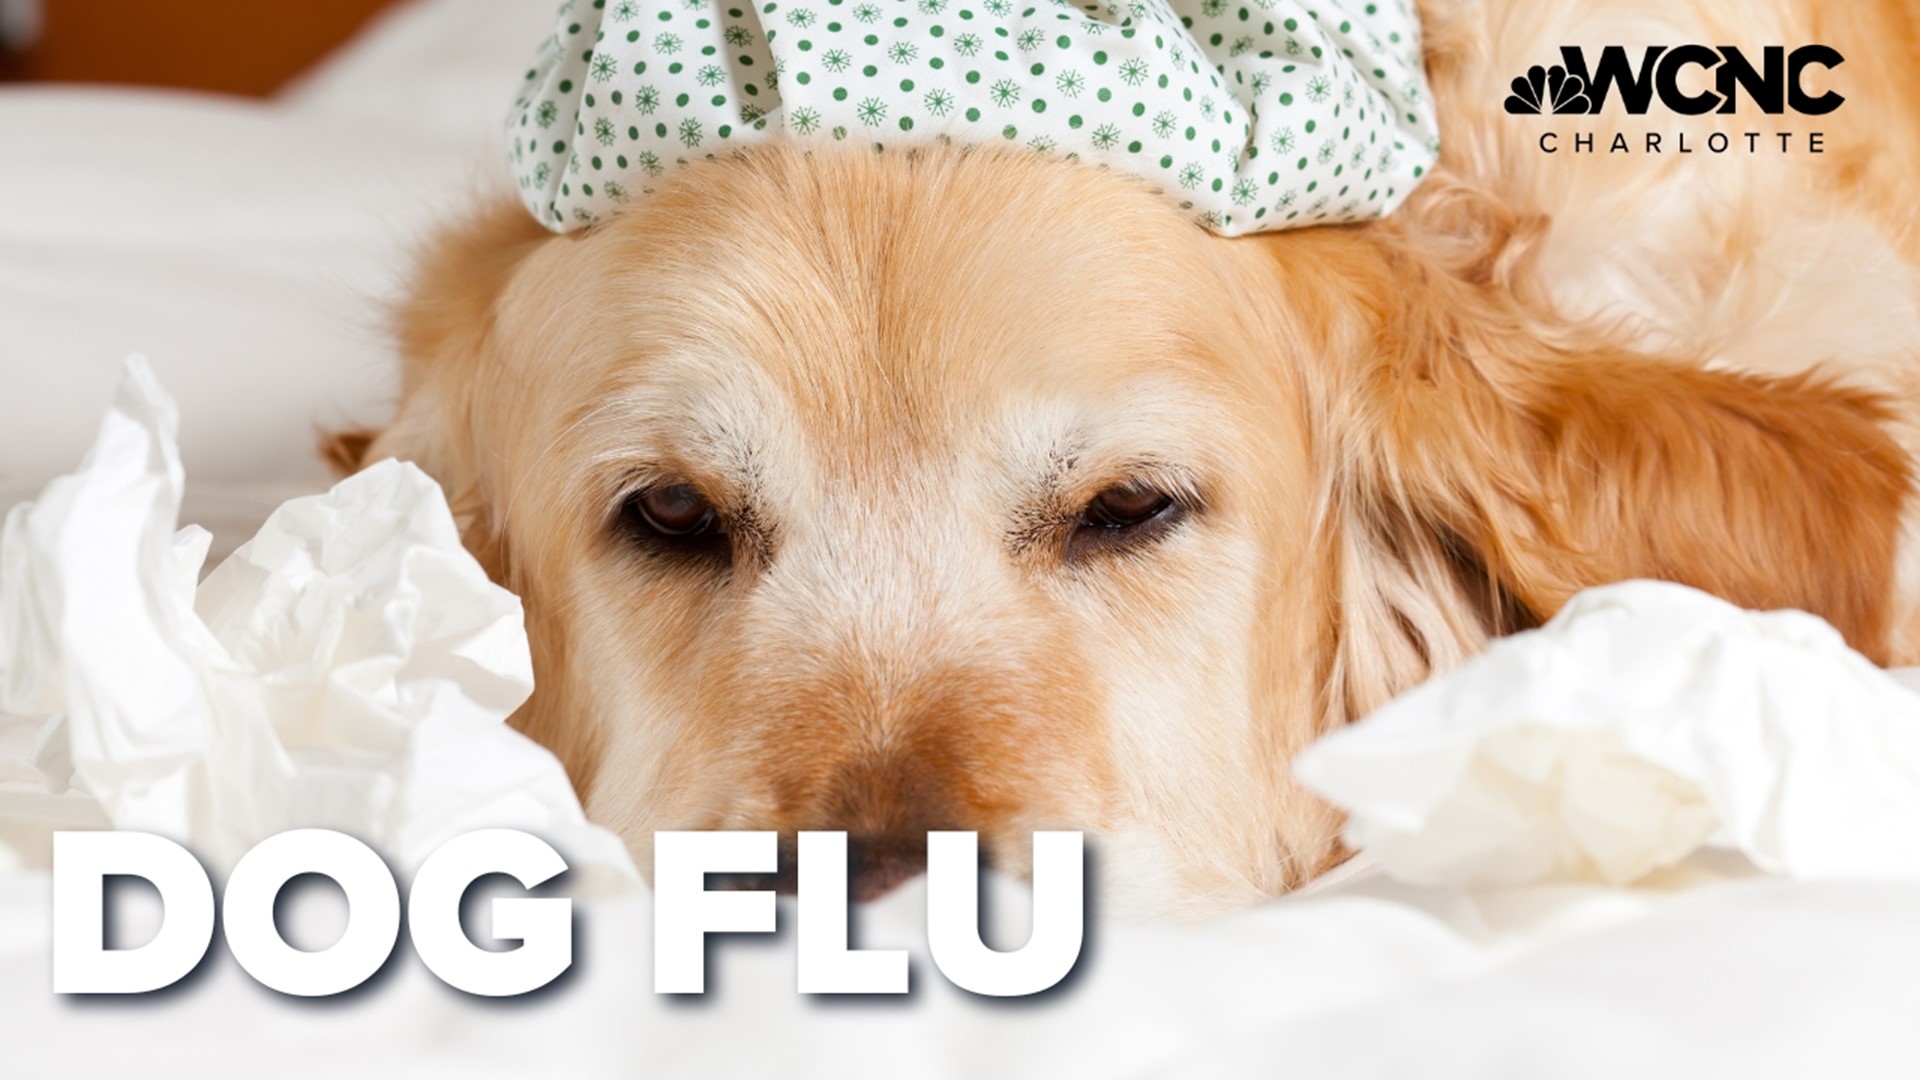 There is a serious and very contagious dog flu spreading through the Charlotte area.